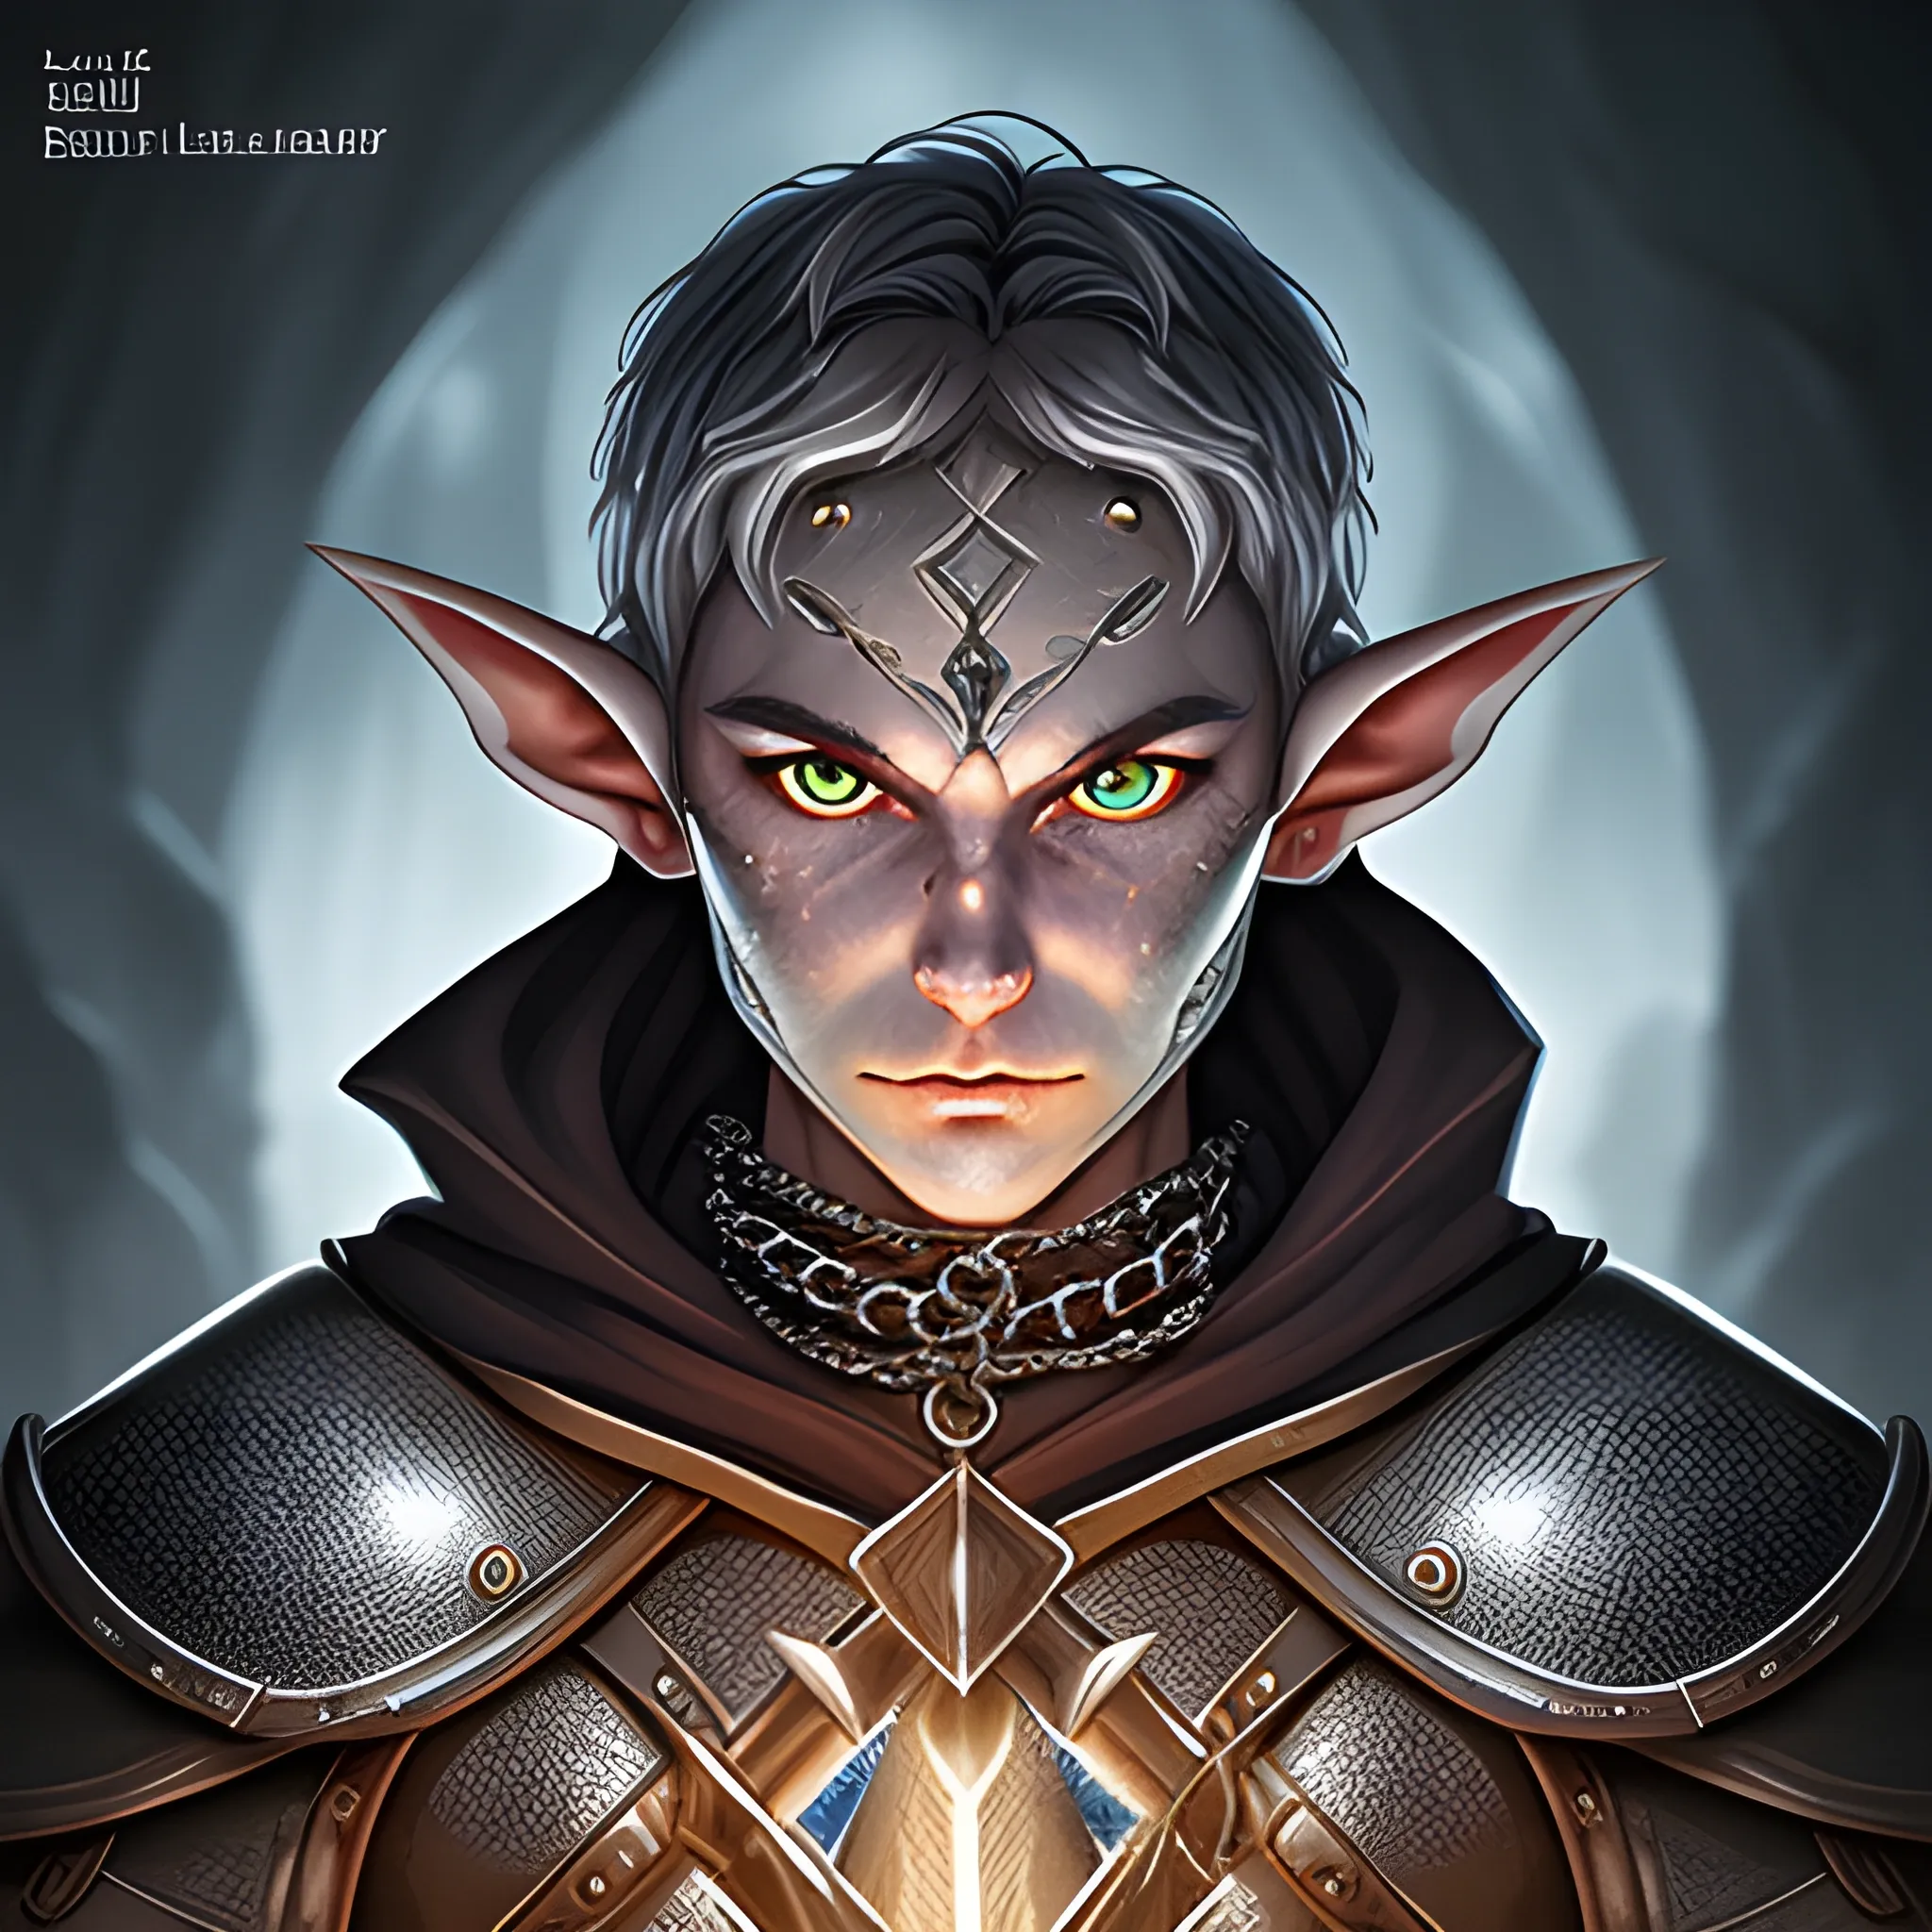 half body portrait, elf, man, chain mail, holy, blacksmith, highly detailed, glowing eyes, Fae, fairy, high fantasy, magical, great composition, forge, dynamic pose, manhwa style, hammer, concept art, Cartoon